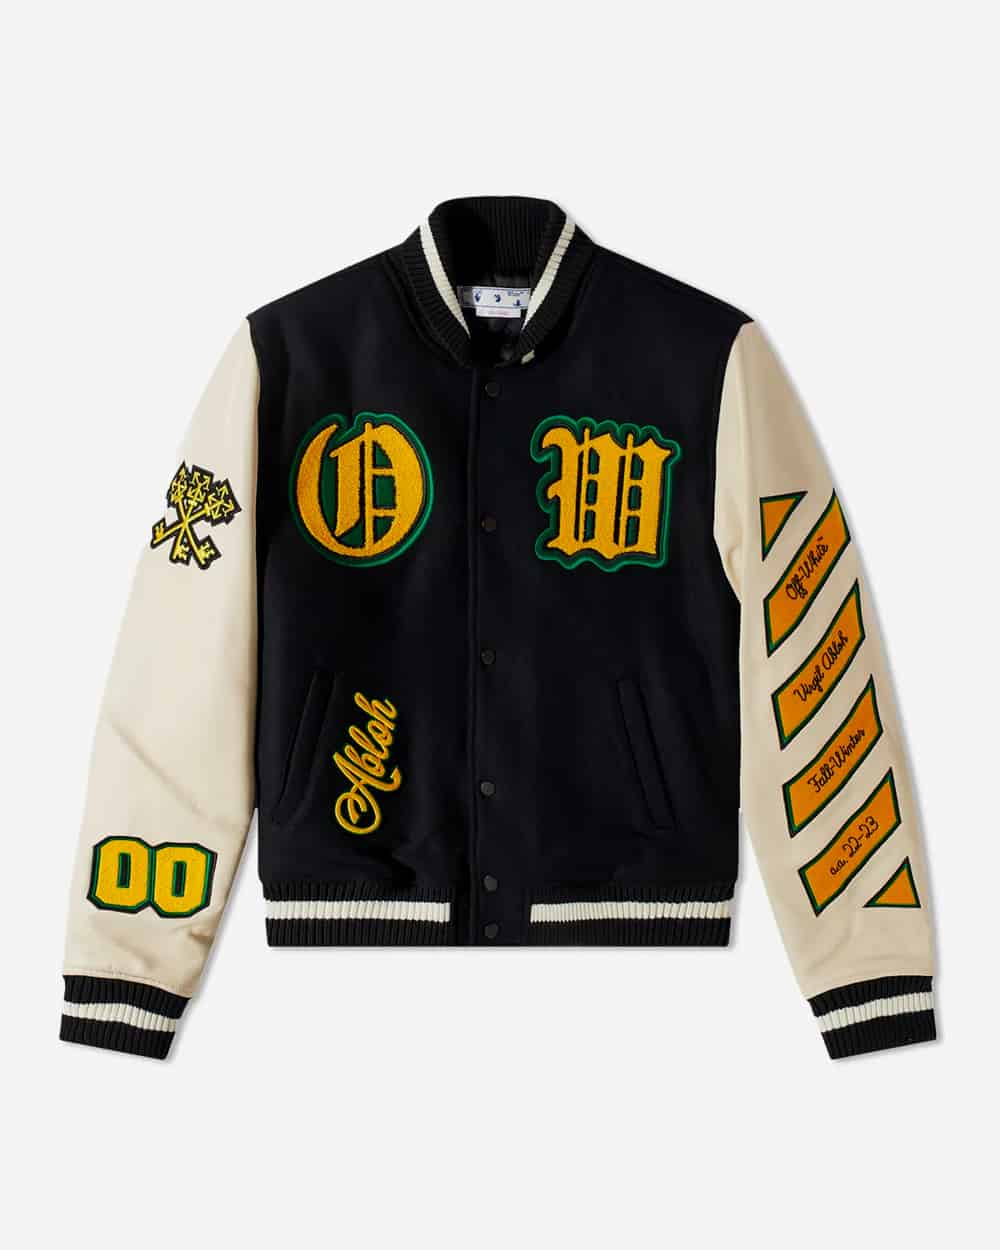 The Best Varsity Jackets Guide You'll Ever Read (2023)